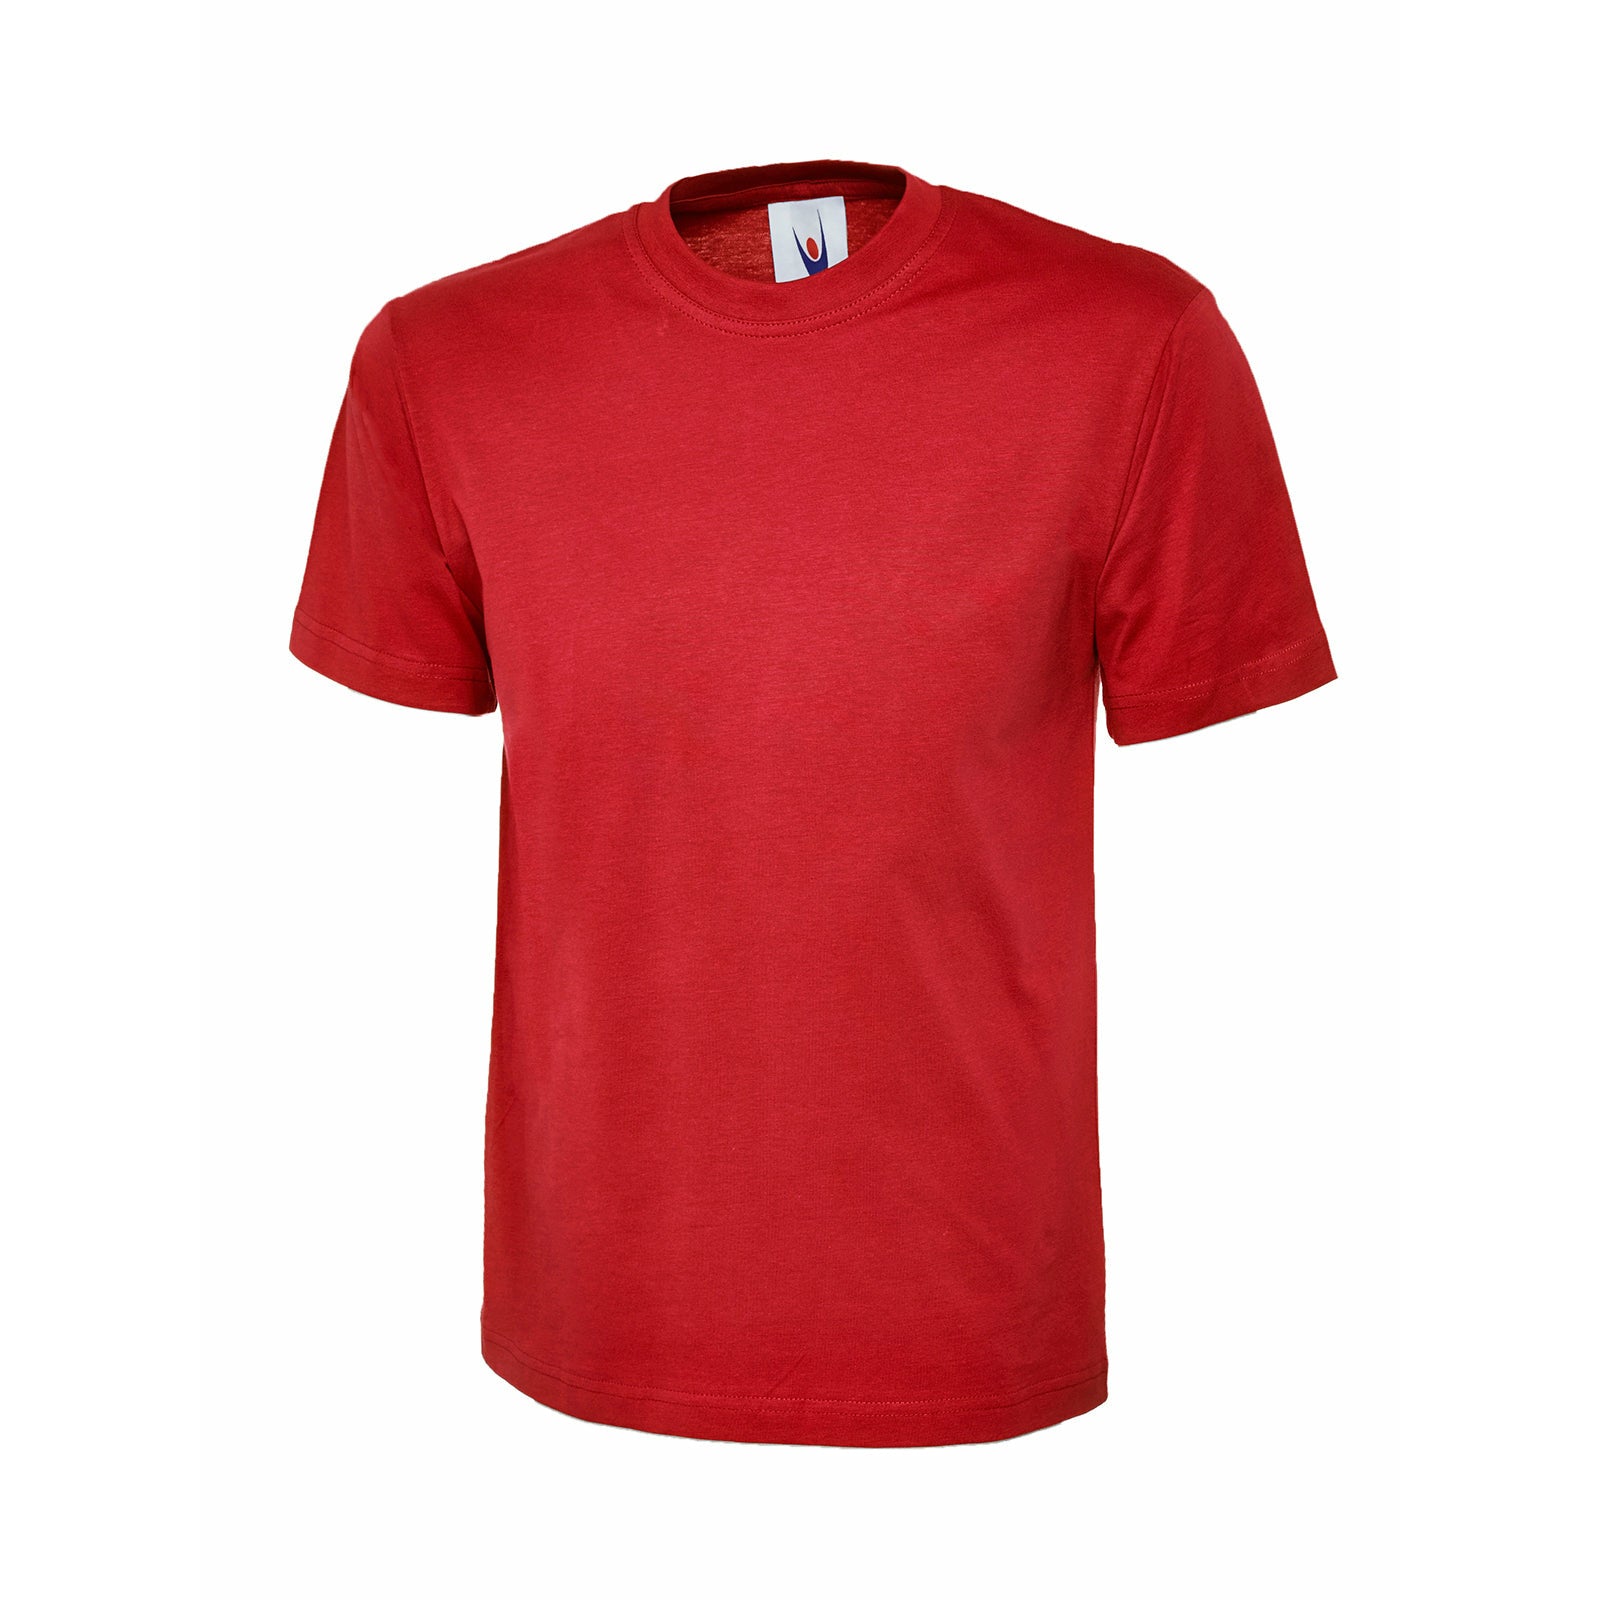 Childrens Classic T-shirt Red